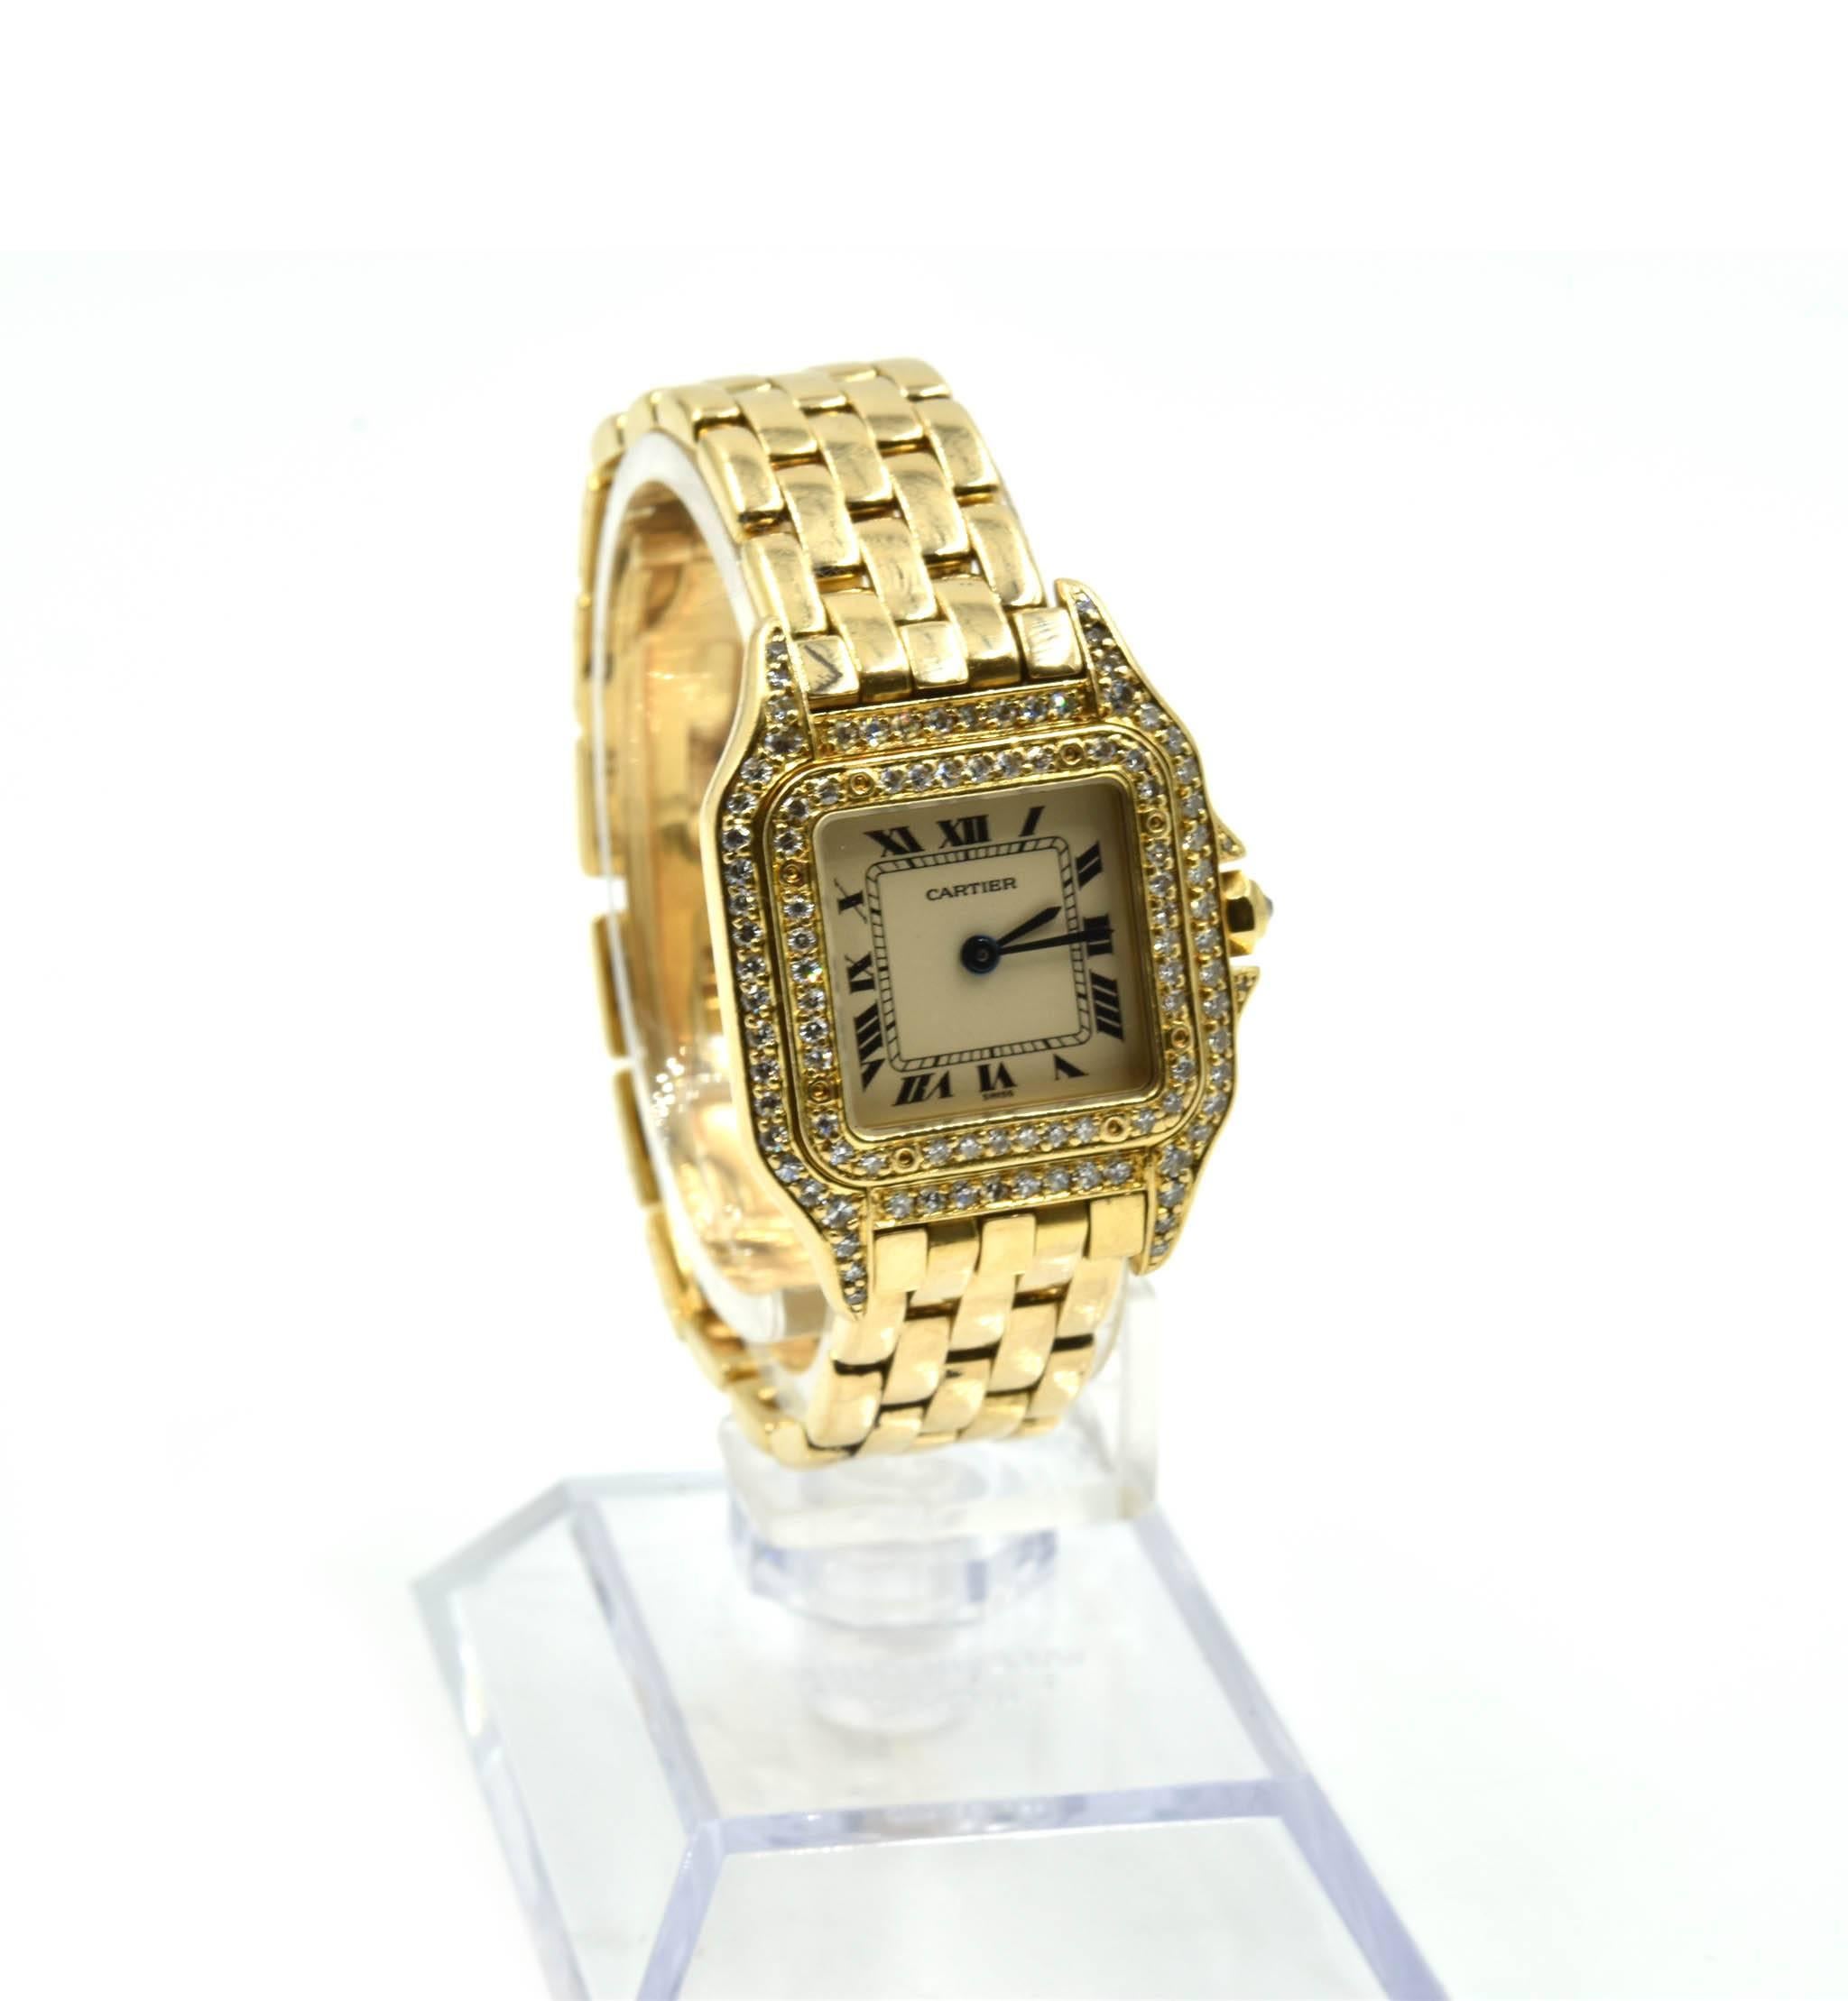 Movement: quartz
Function: hours, minutes
Case: square 23mm 18k yellow gold case set with diamonds, diamond bezel, sapphire protective crystal, pull/push crown
Dial: champagne dial with blued steel hands, black roman numeral hour markers, black